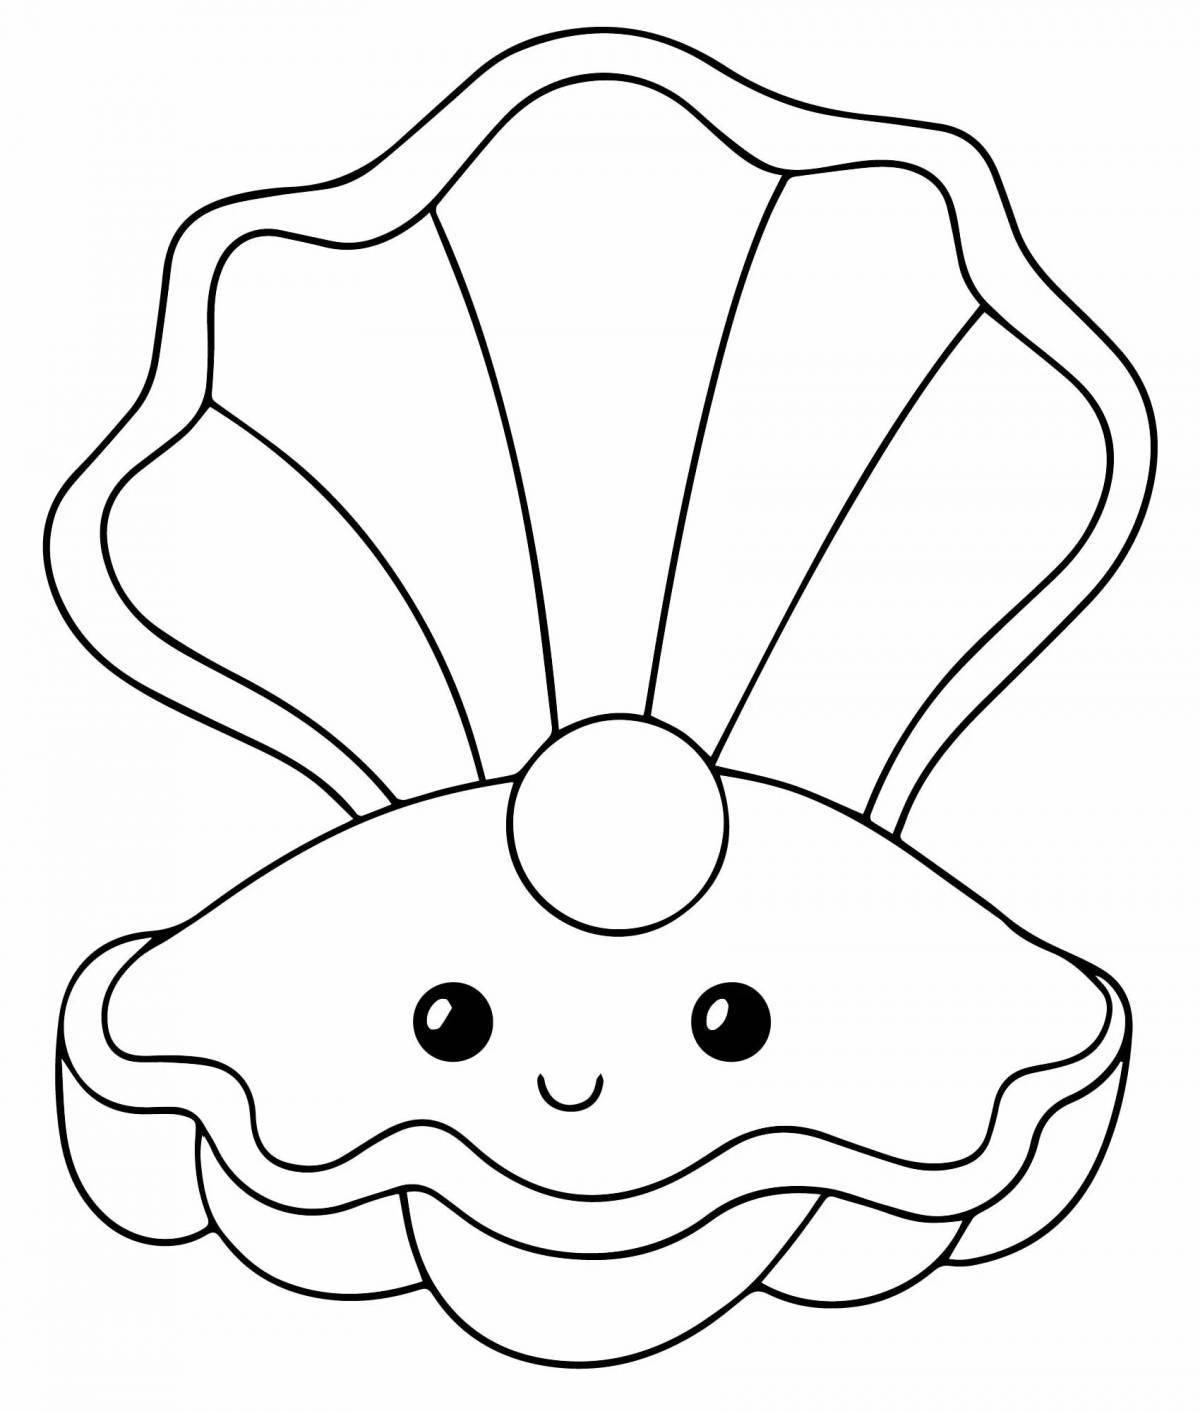 Magic shell coloring book for kids